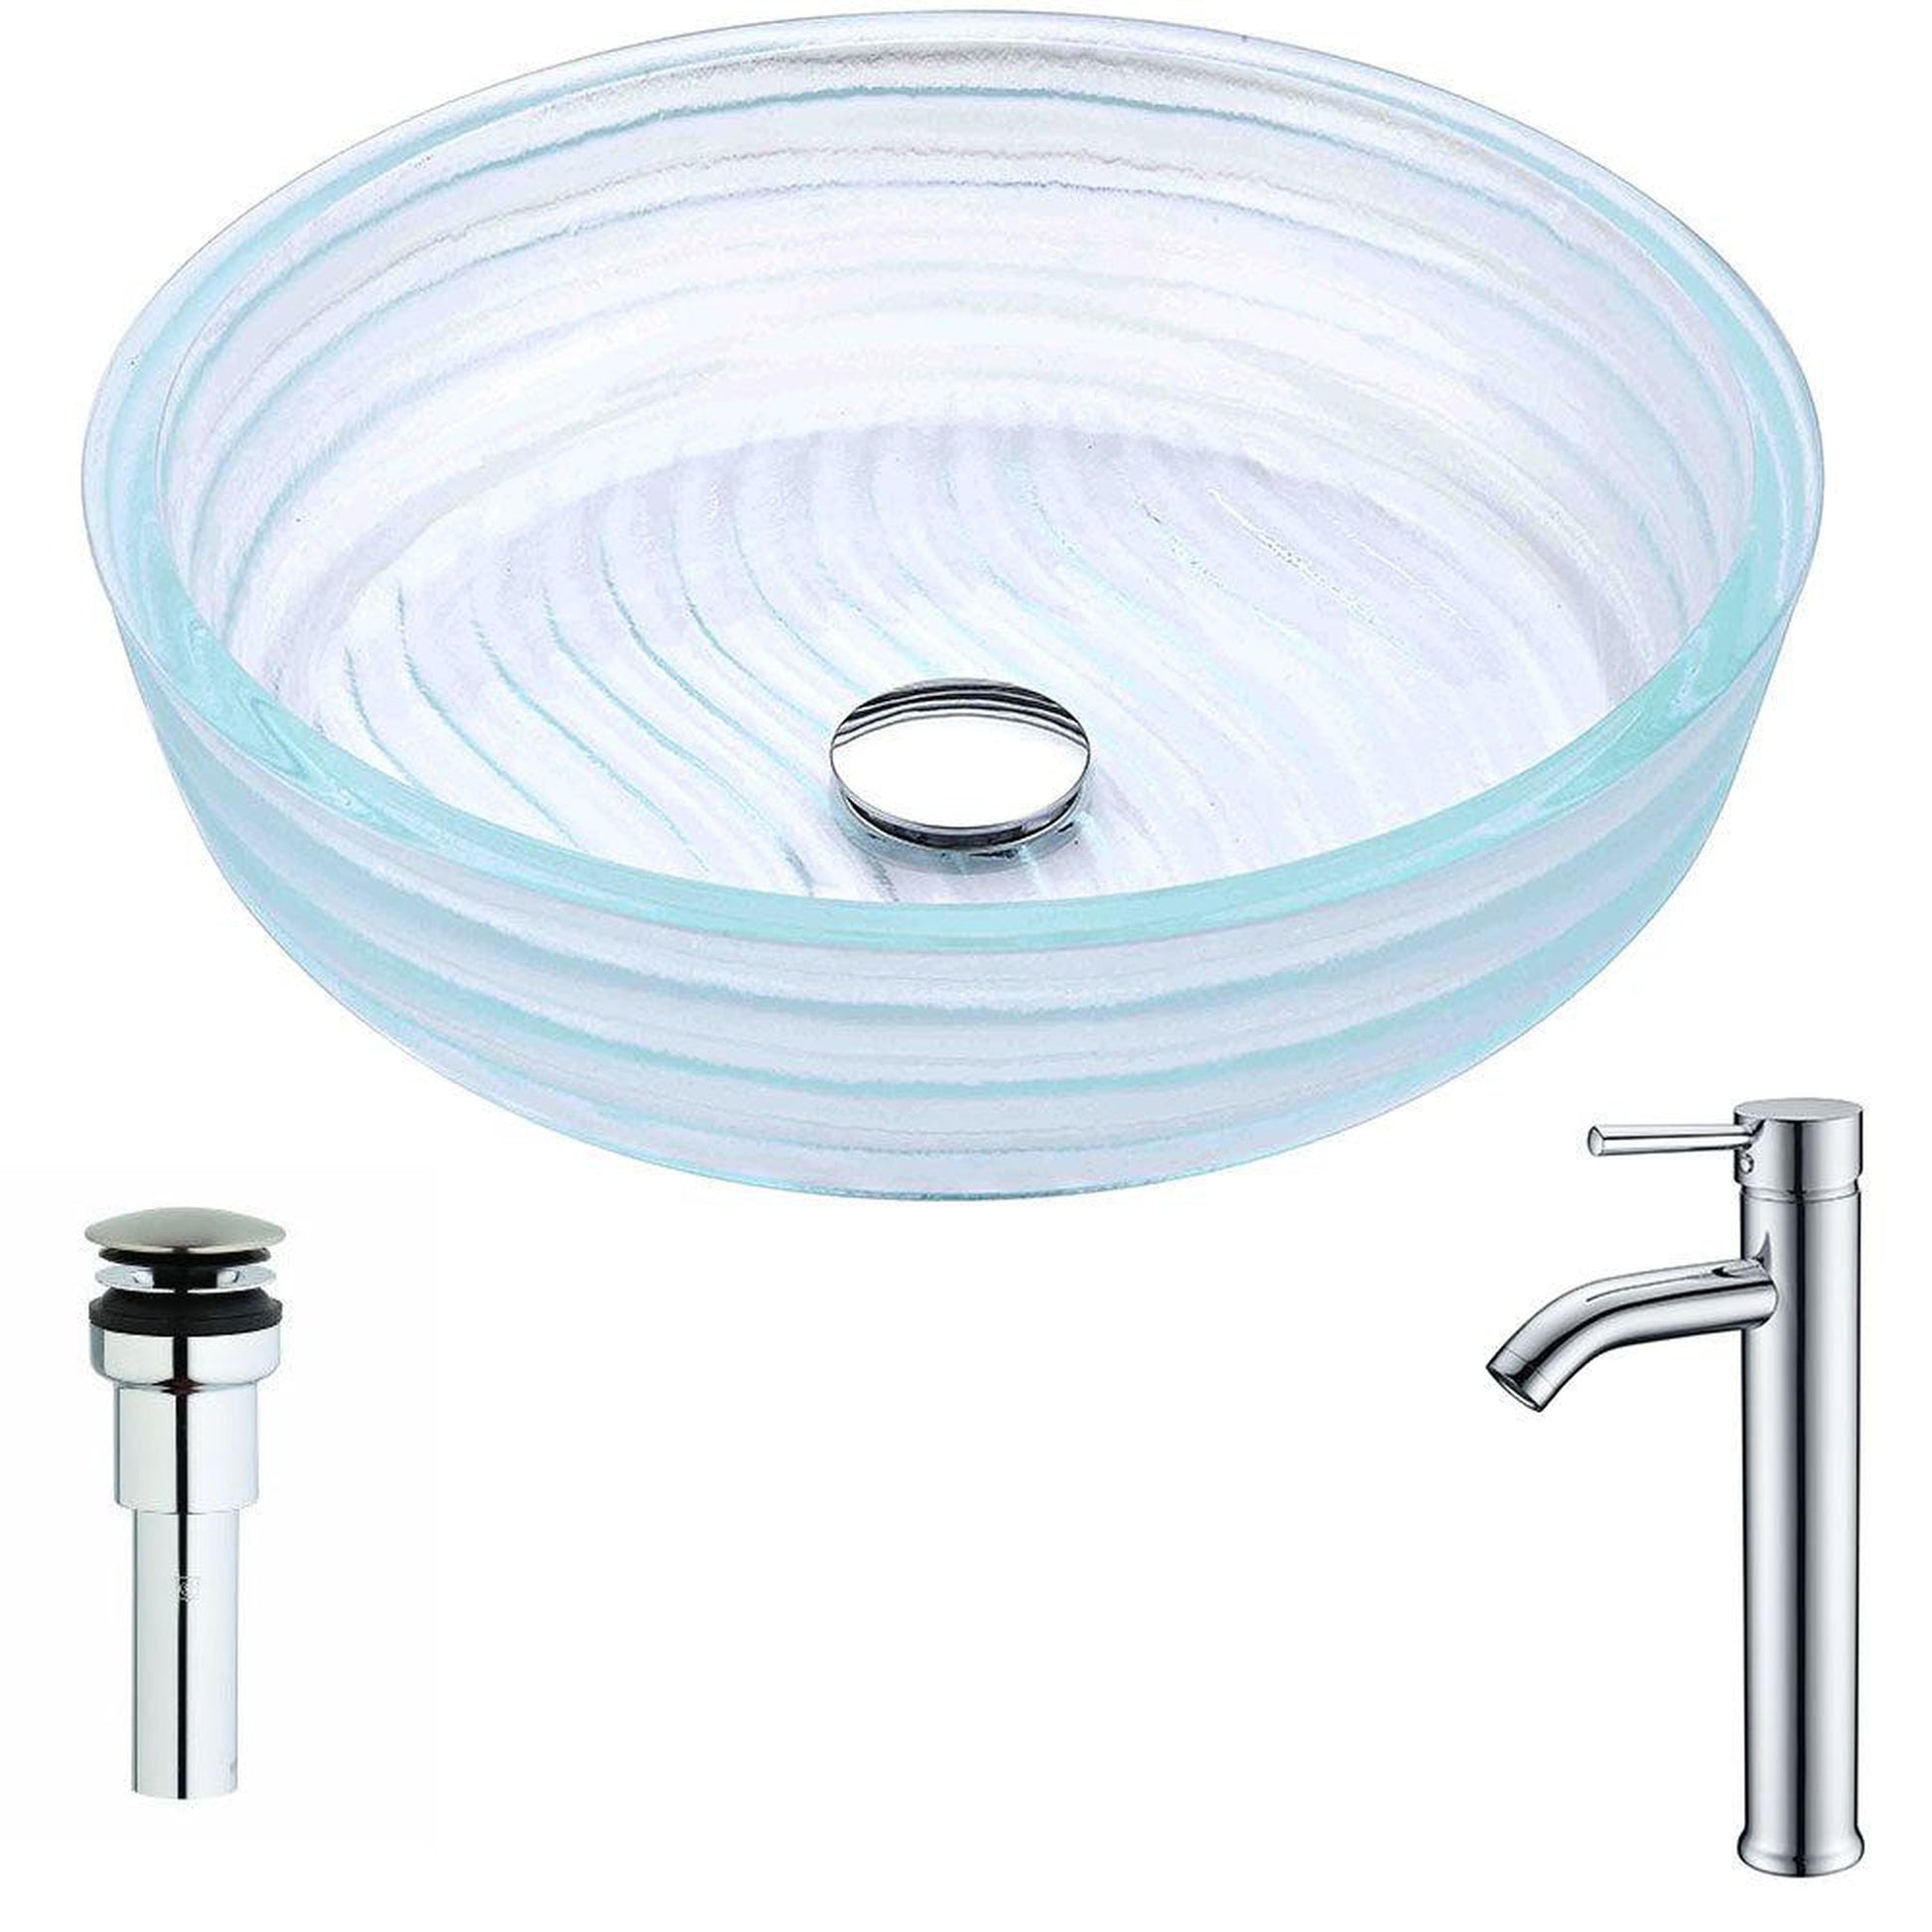 ANZZI Canta Series 17" x 17" Cylinder Shape Translucent Crystal Deco-Glass Vessel Sink With Chrome Pop-Up Drain and Fann Faucet